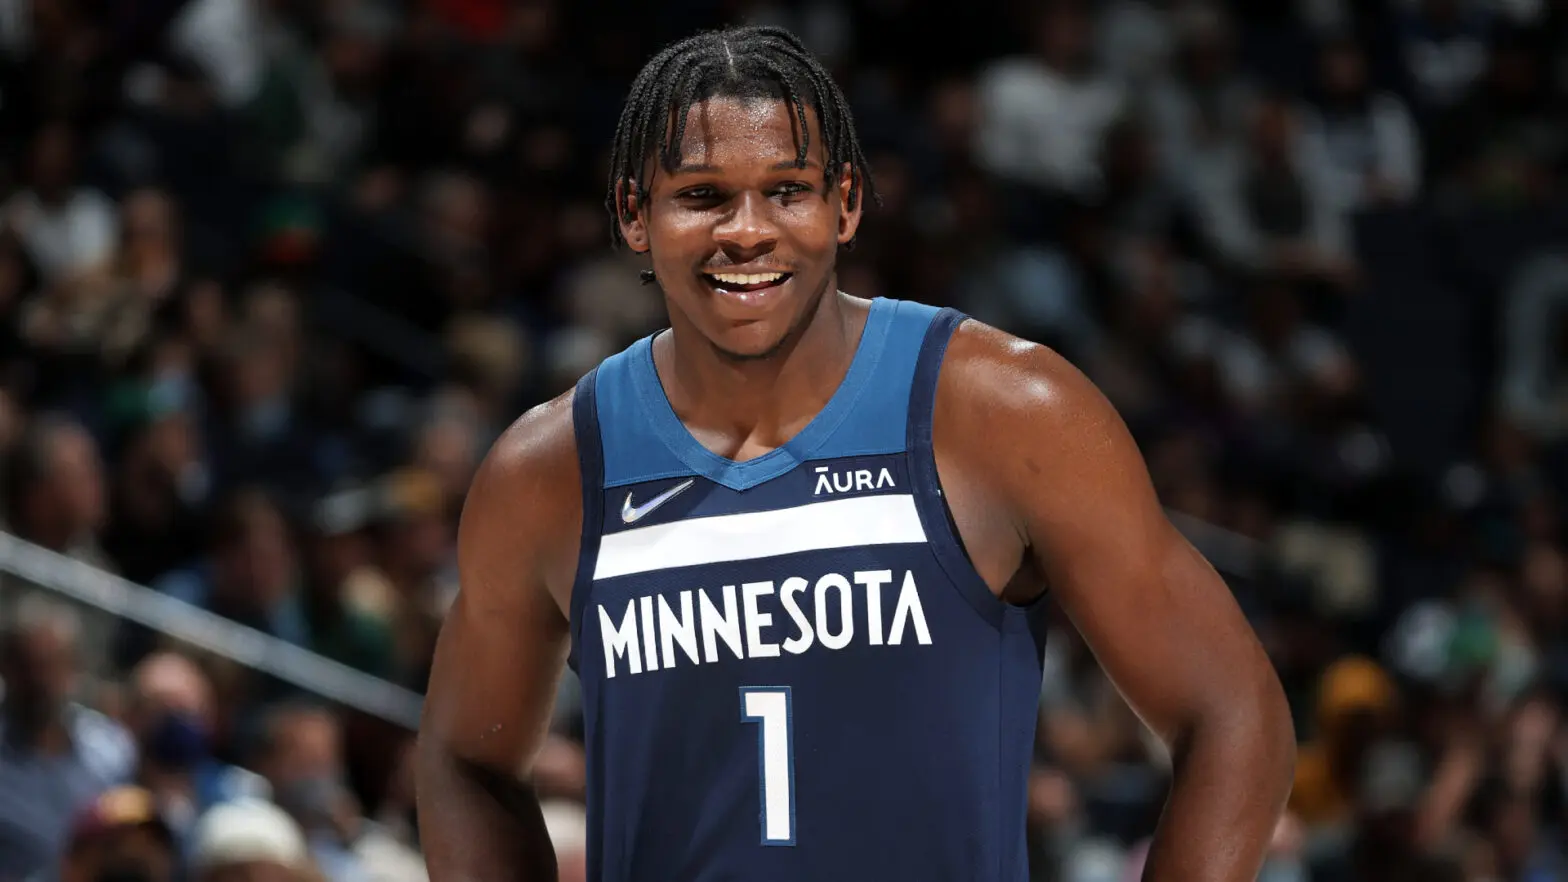 NBA All-Star 2023: Anthony Edwards, De'Aaron Fox, Pascal Siakam to replace  Stephen Curry, Kevin Durant, Zion Williamson